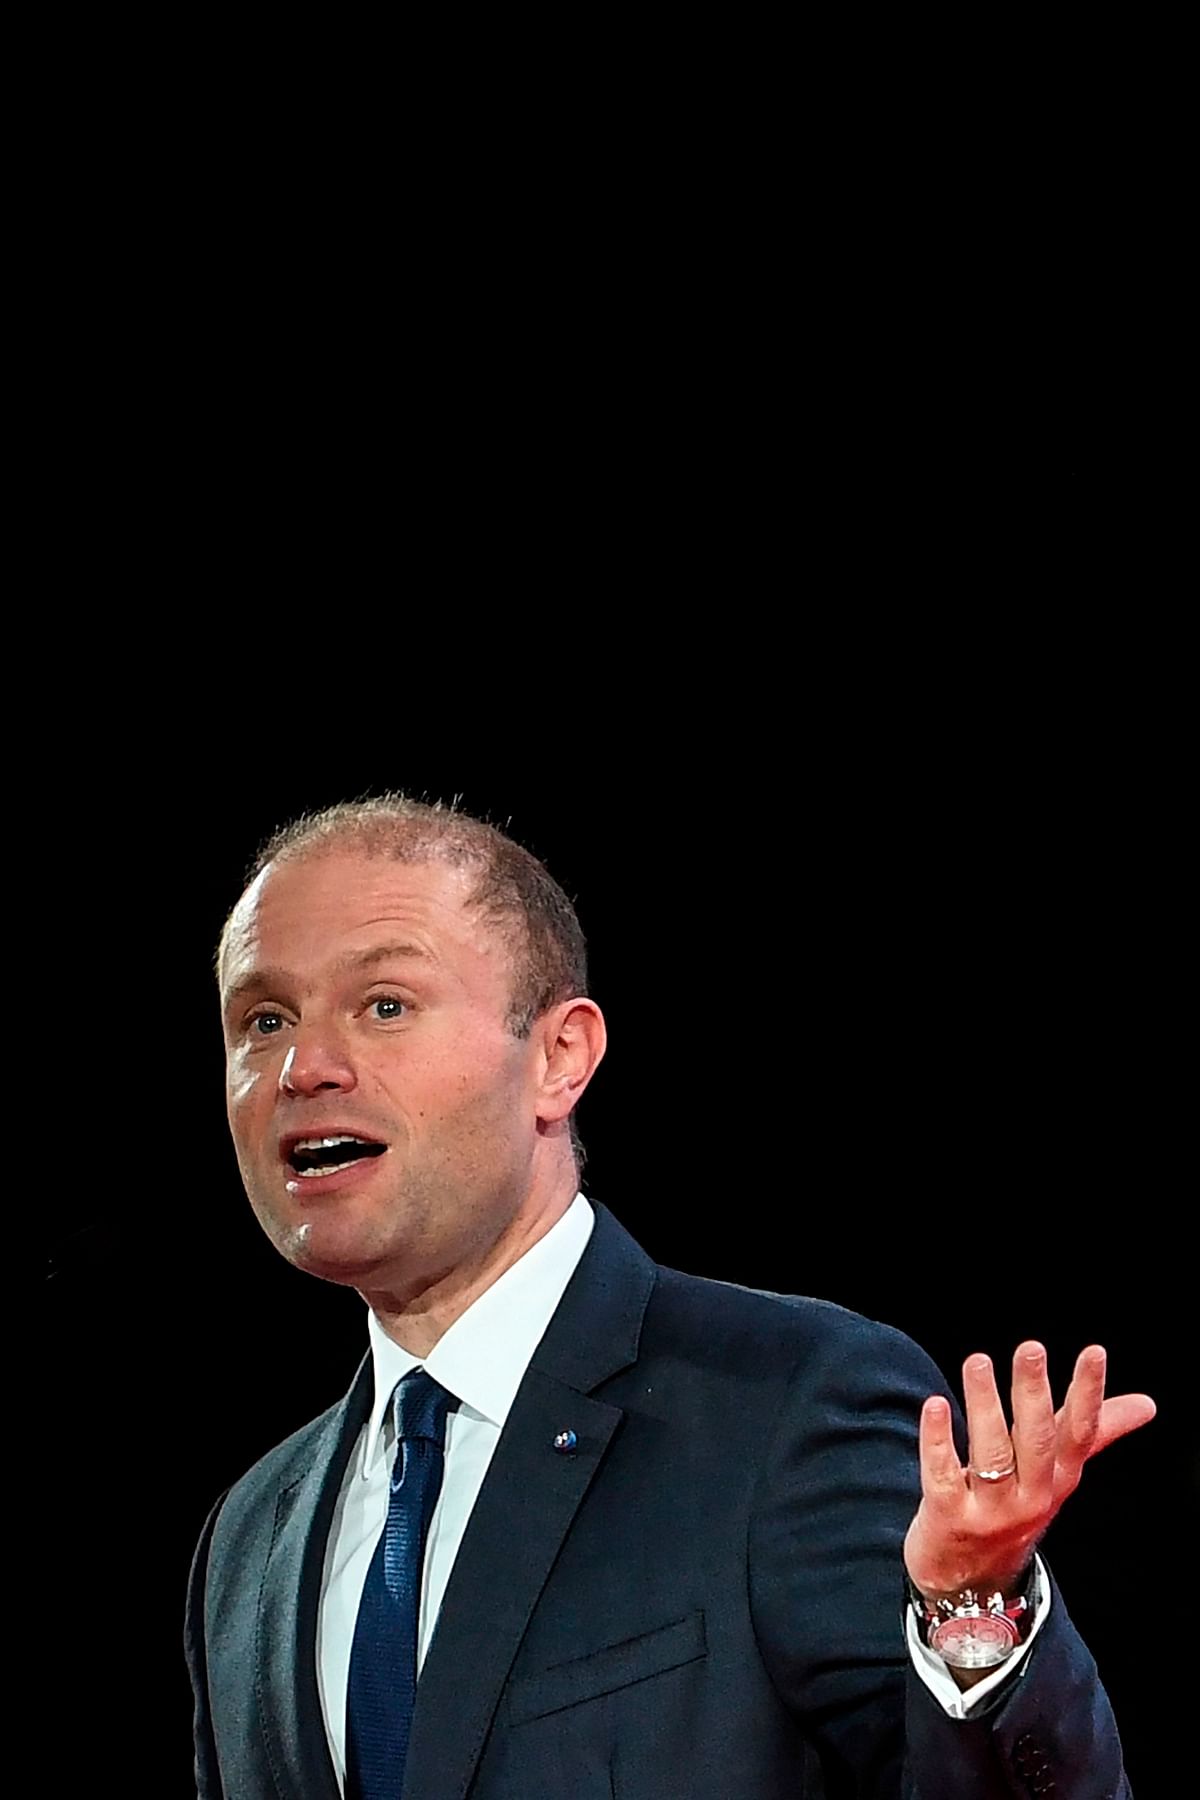 This file photo taken on 8 December 2018 shows prime minister of Malta Joseph Muscat delivering a speech during the XI Party of European Socialists Congress at the University Institute of Lisbon (ISCTE) in Lisbon. Photo: AFP